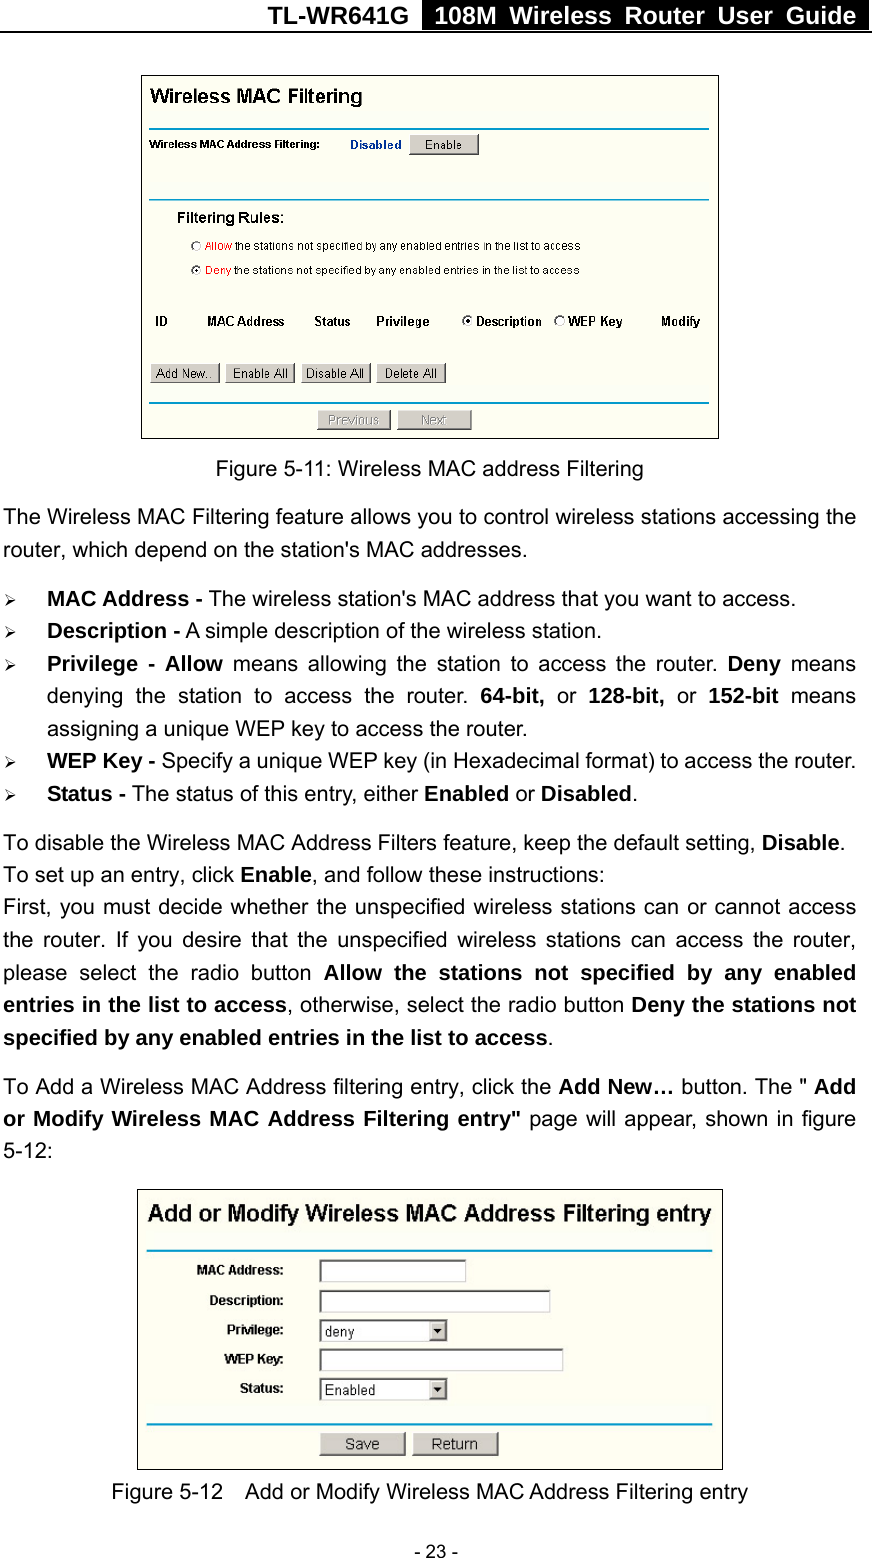 TL-WR641G   108M Wireless Router User Guide   - 23 - Figure 5-11: Wireless MAC address Filtering The Wireless MAC Filtering feature allows you to control wireless stations accessing the router, which depend on the station&apos;s MAC addresses.   ¾ MAC Address - The wireless station&apos;s MAC address that you want to access.   ¾ Description - A simple description of the wireless station.   ¾ Privilege - Allow means allowing the station to access the router. Deny means denying the station to access the router. 64-bit, or 128-bit, or 152-bit  means assigning a unique WEP key to access the router.   ¾ WEP Key - Specify a unique WEP key (in Hexadecimal format) to access the router.   ¾ Status - The status of this entry, either Enabled or Disabled. To disable the Wireless MAC Address Filters feature, keep the default setting, Disable. To set up an entry, click Enable, and follow these instructions:   First, you must decide whether the unspecified wireless stations can or cannot access the router. If you desire that the unspecified wireless stations can access the router, please select the radio button Allow the stations not specified by any enabled entries in the list to access, otherwise, select the radio button Deny the stations not specified by any enabled entries in the list to access. To Add a Wireless MAC Address filtering entry, click the Add New… button. The &quot; Add or Modify Wireless MAC Address Filtering entry&quot; page will appear, shown in figure 5-12:  Figure 5-12    Add or Modify Wireless MAC Address Filtering entry 